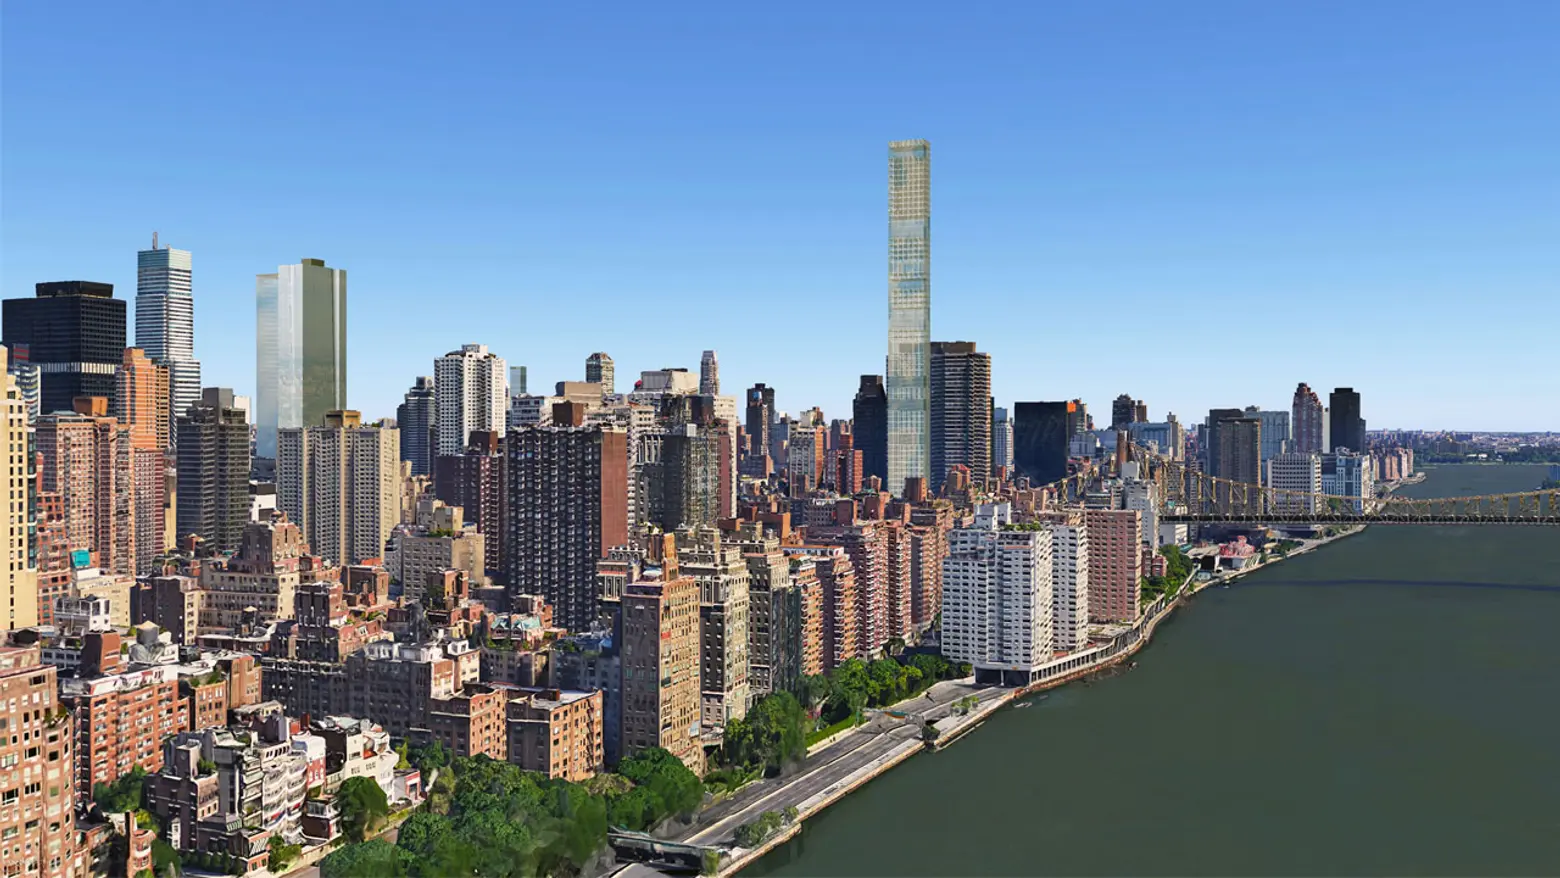 Norman Foster’s Next Condo Tower Will Be 900 Feet; How to Shed Affordable Tenants